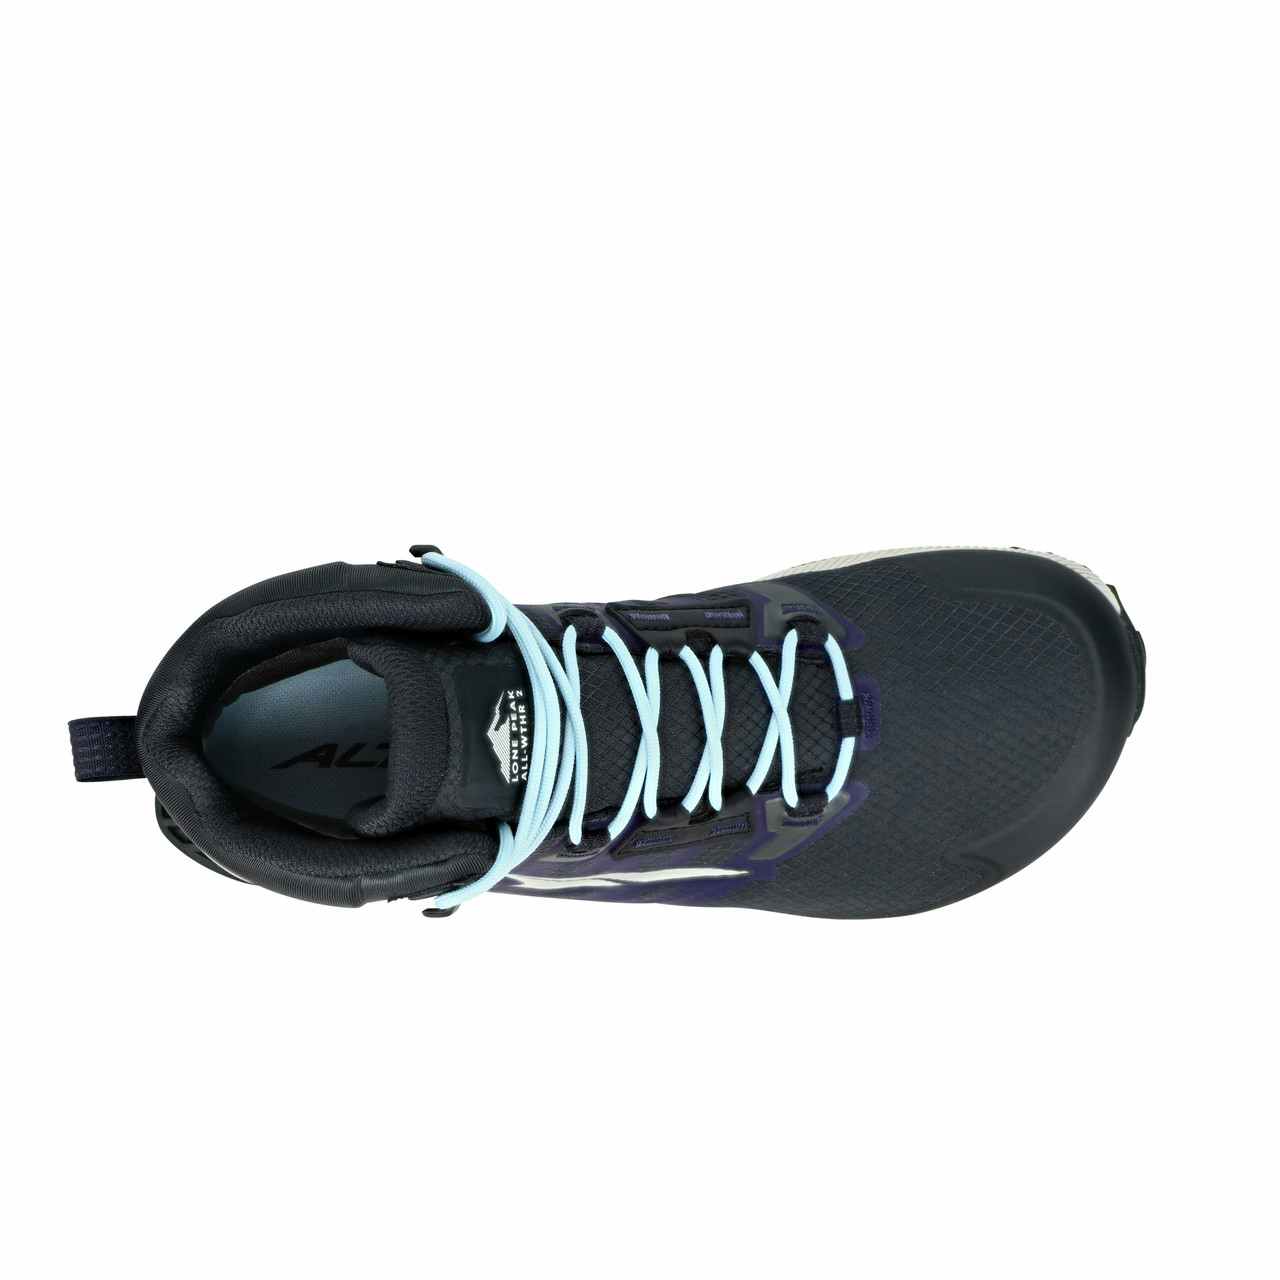 Lone Peak Mid All-Weather 2 Light Trail Shoes Black